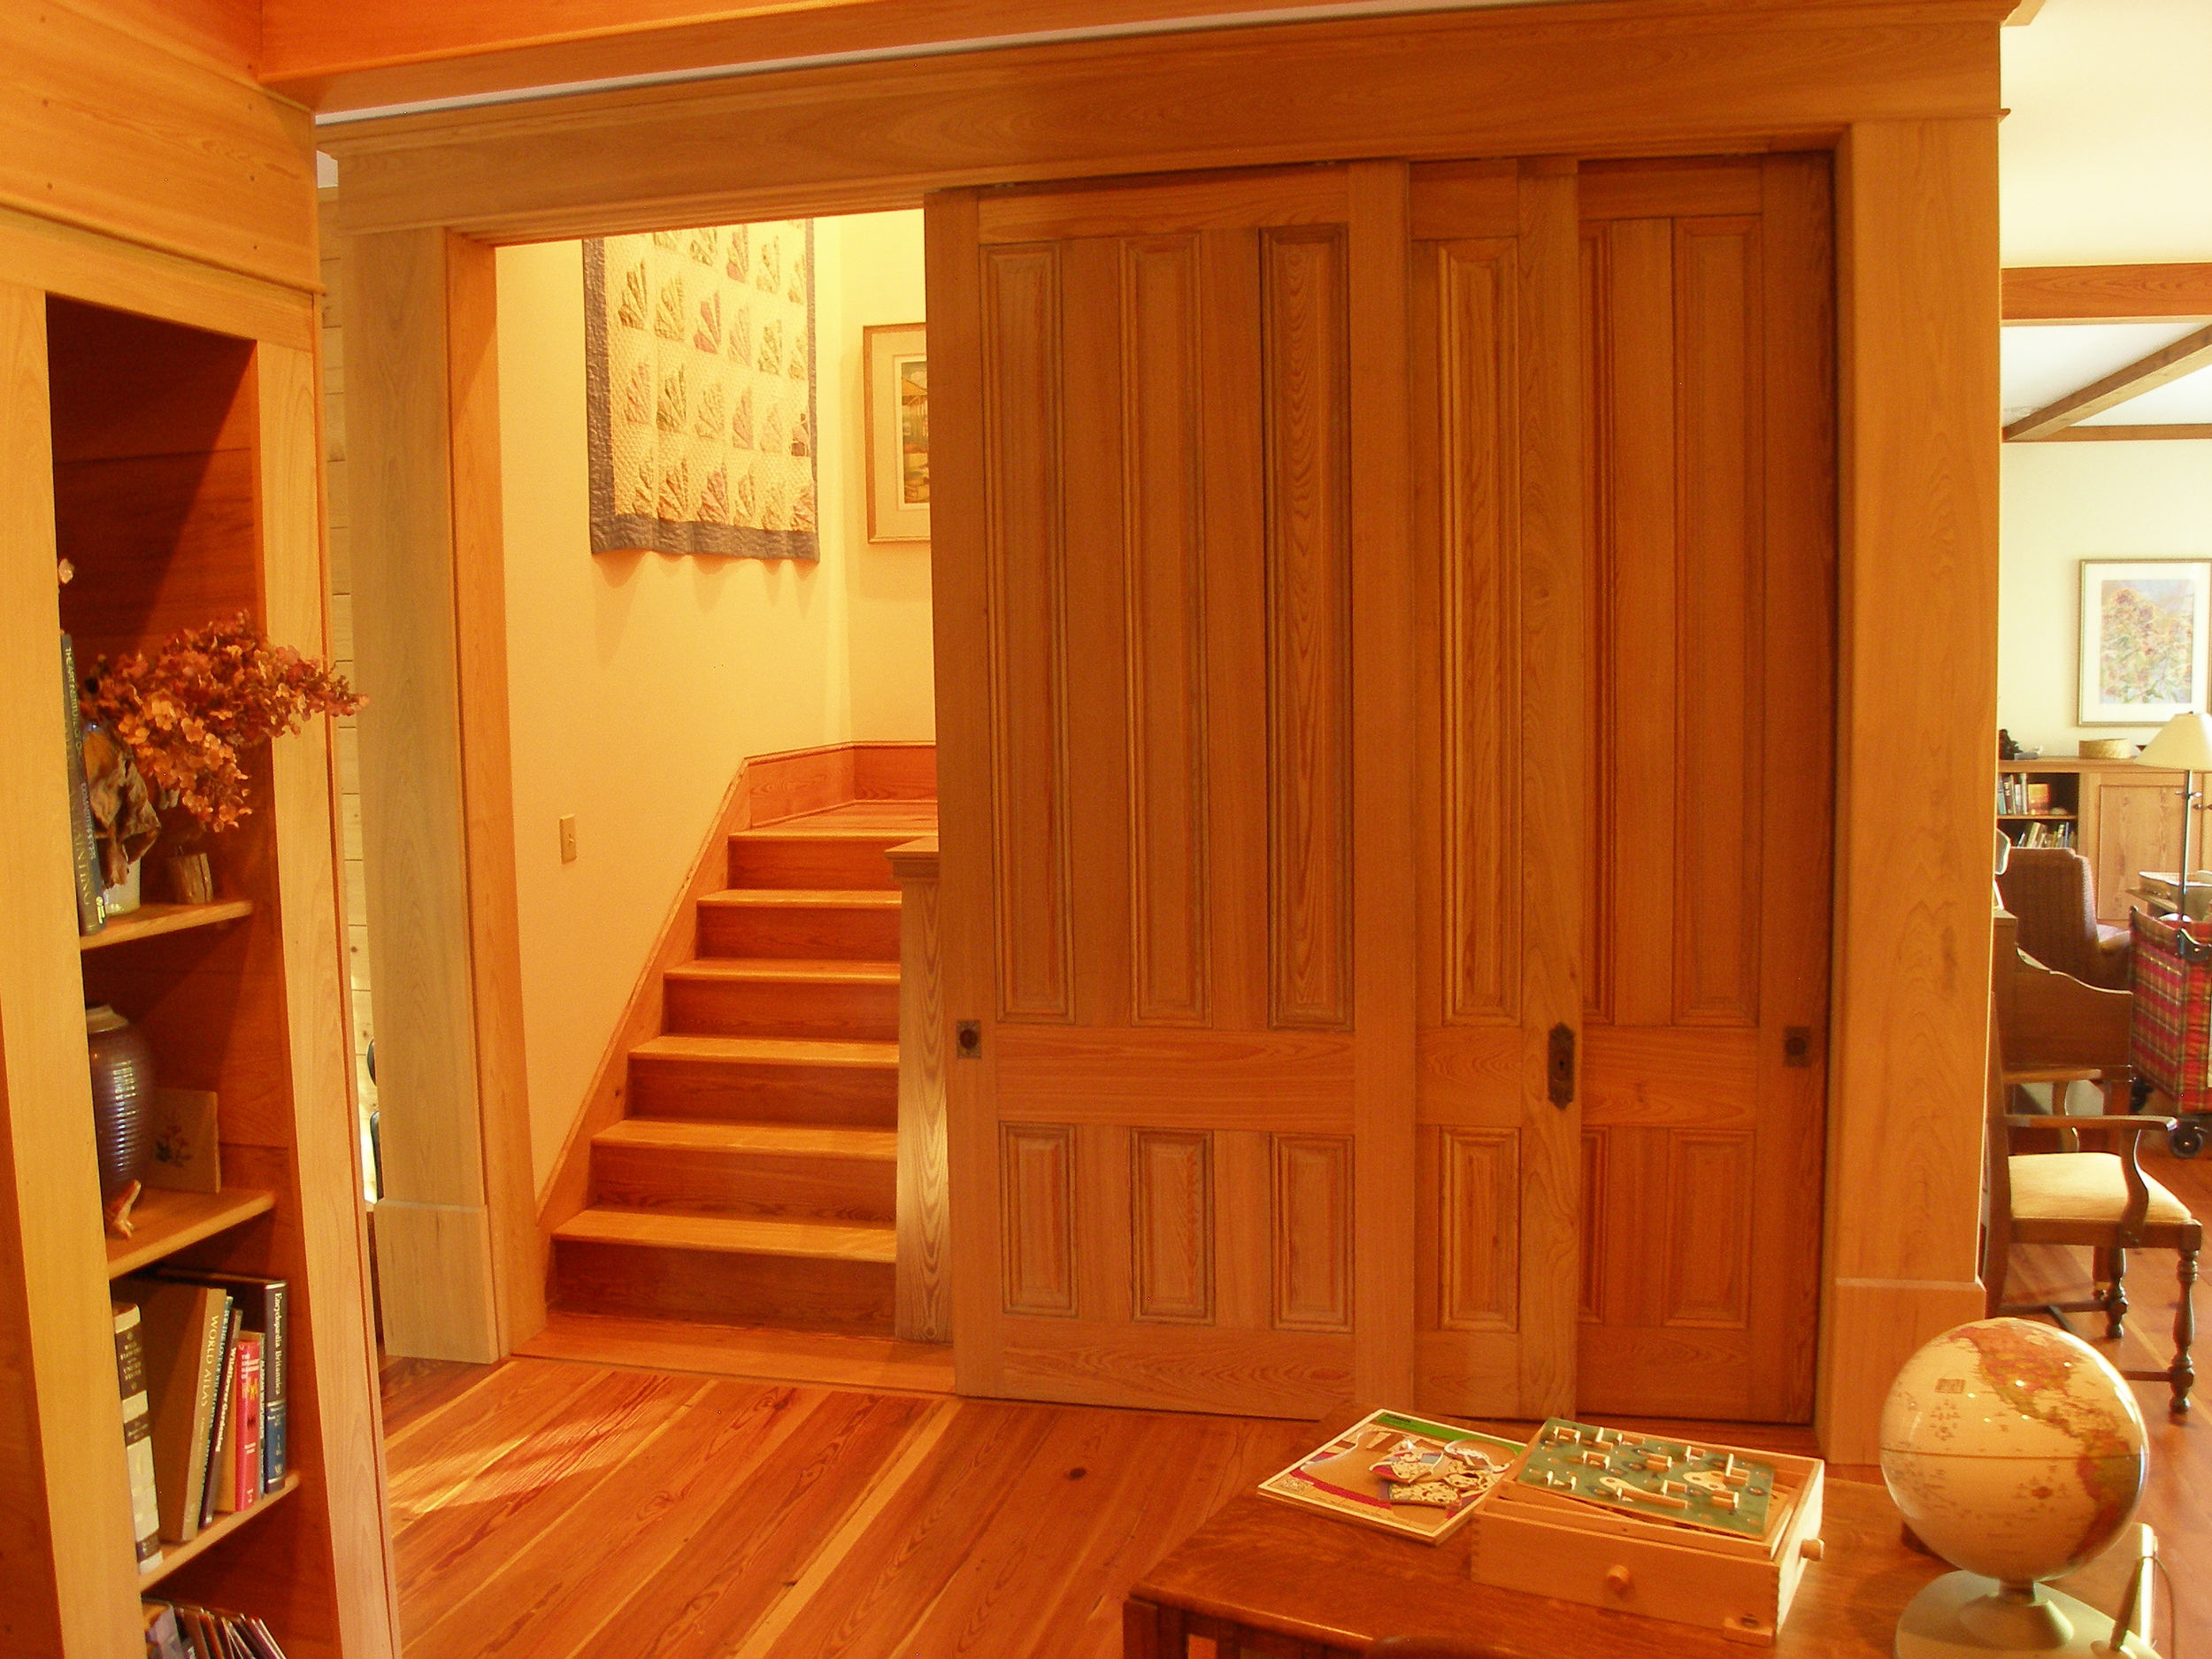 Tall cypress doors open showing stairs to guest bedroom and tower.